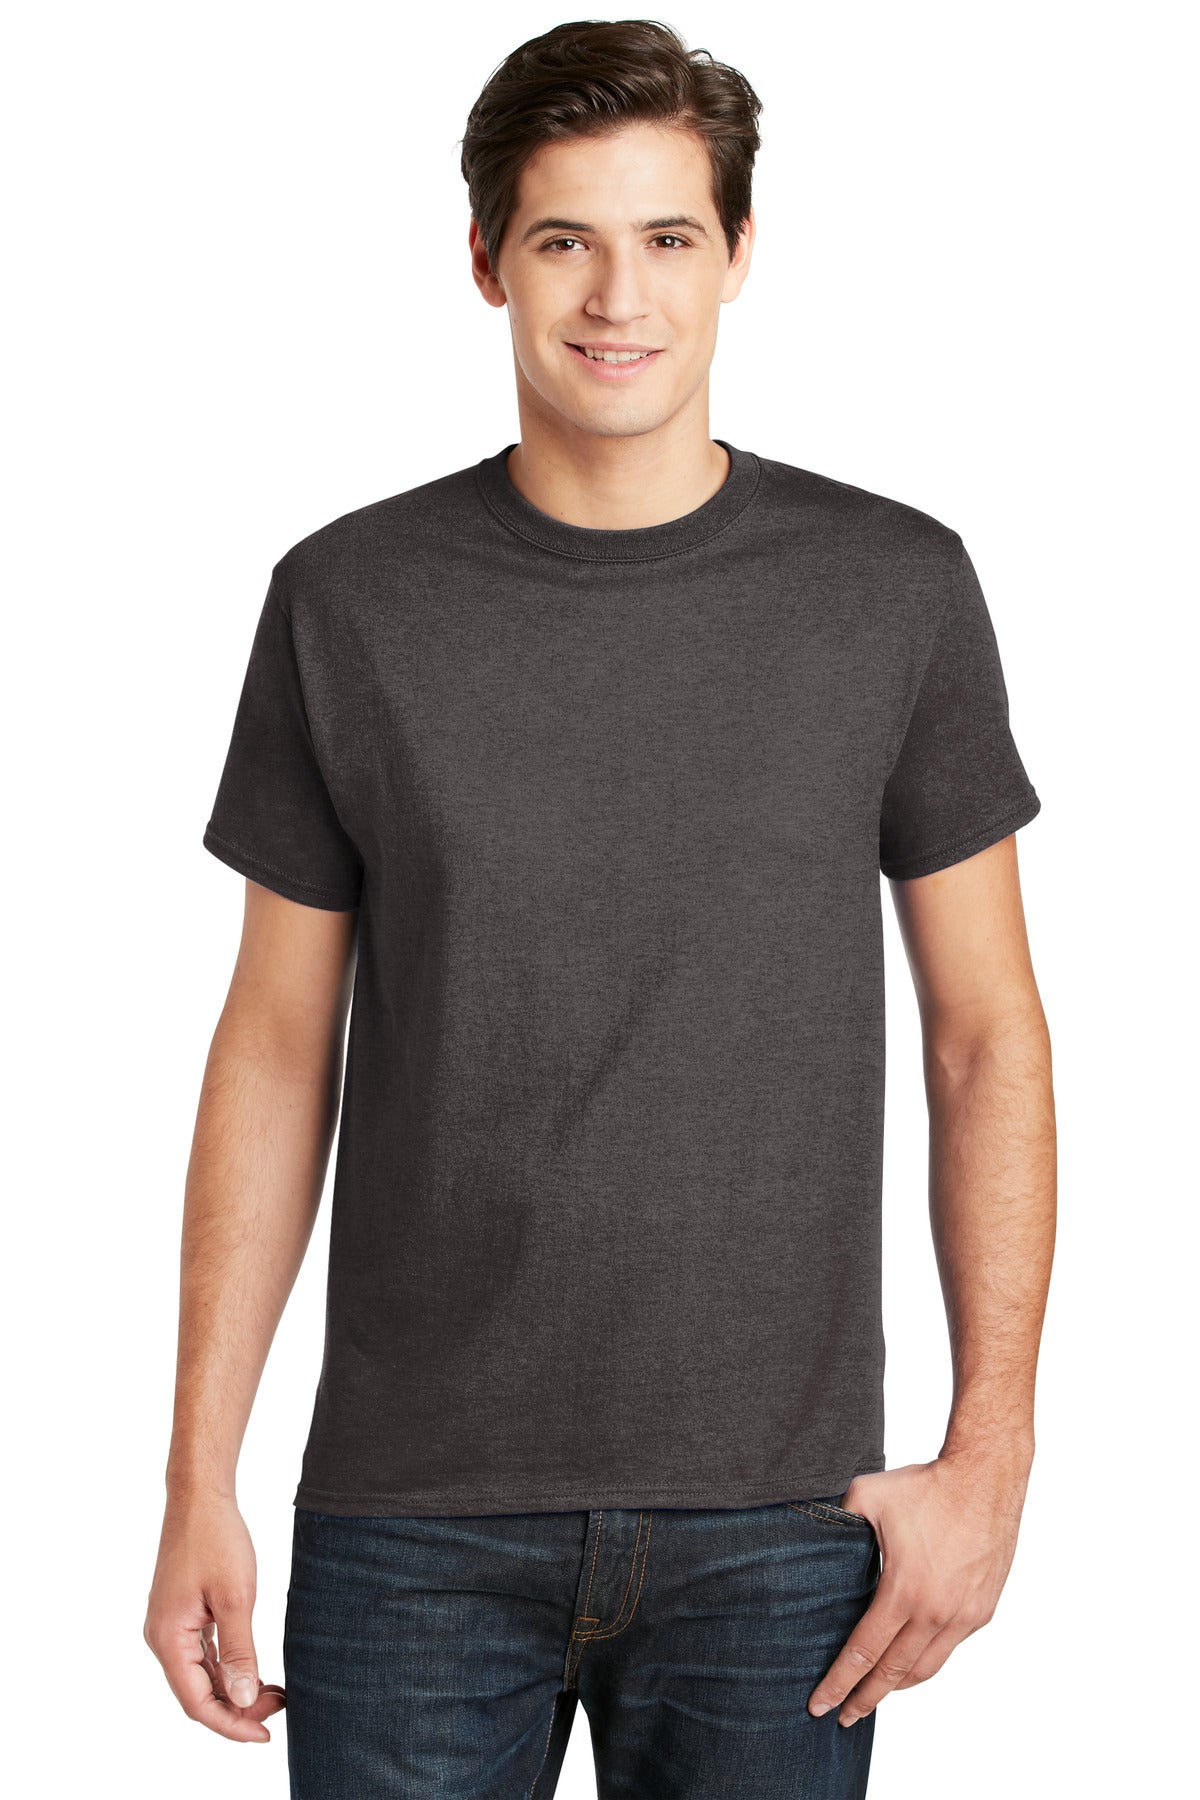 T-Shirts Charcoal Heather Hanes